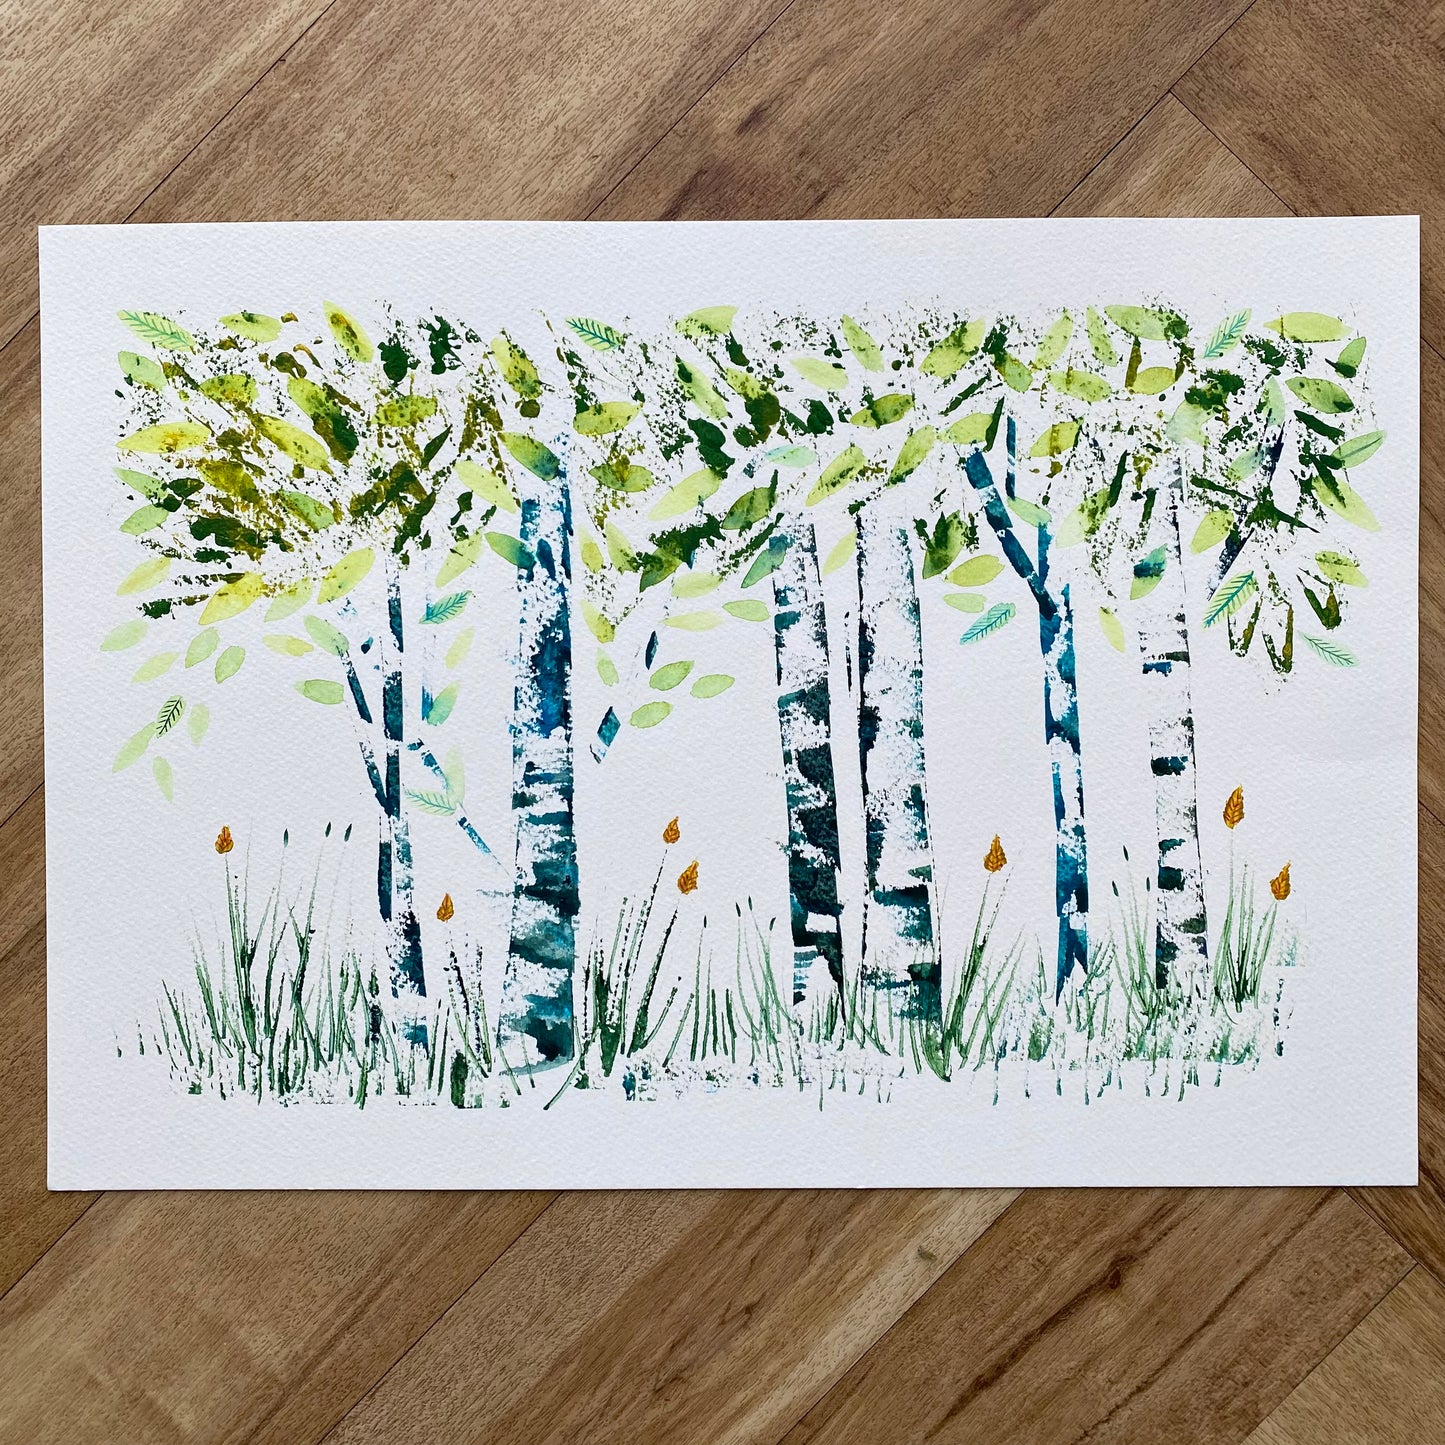 Original sketches and drafts - Trees